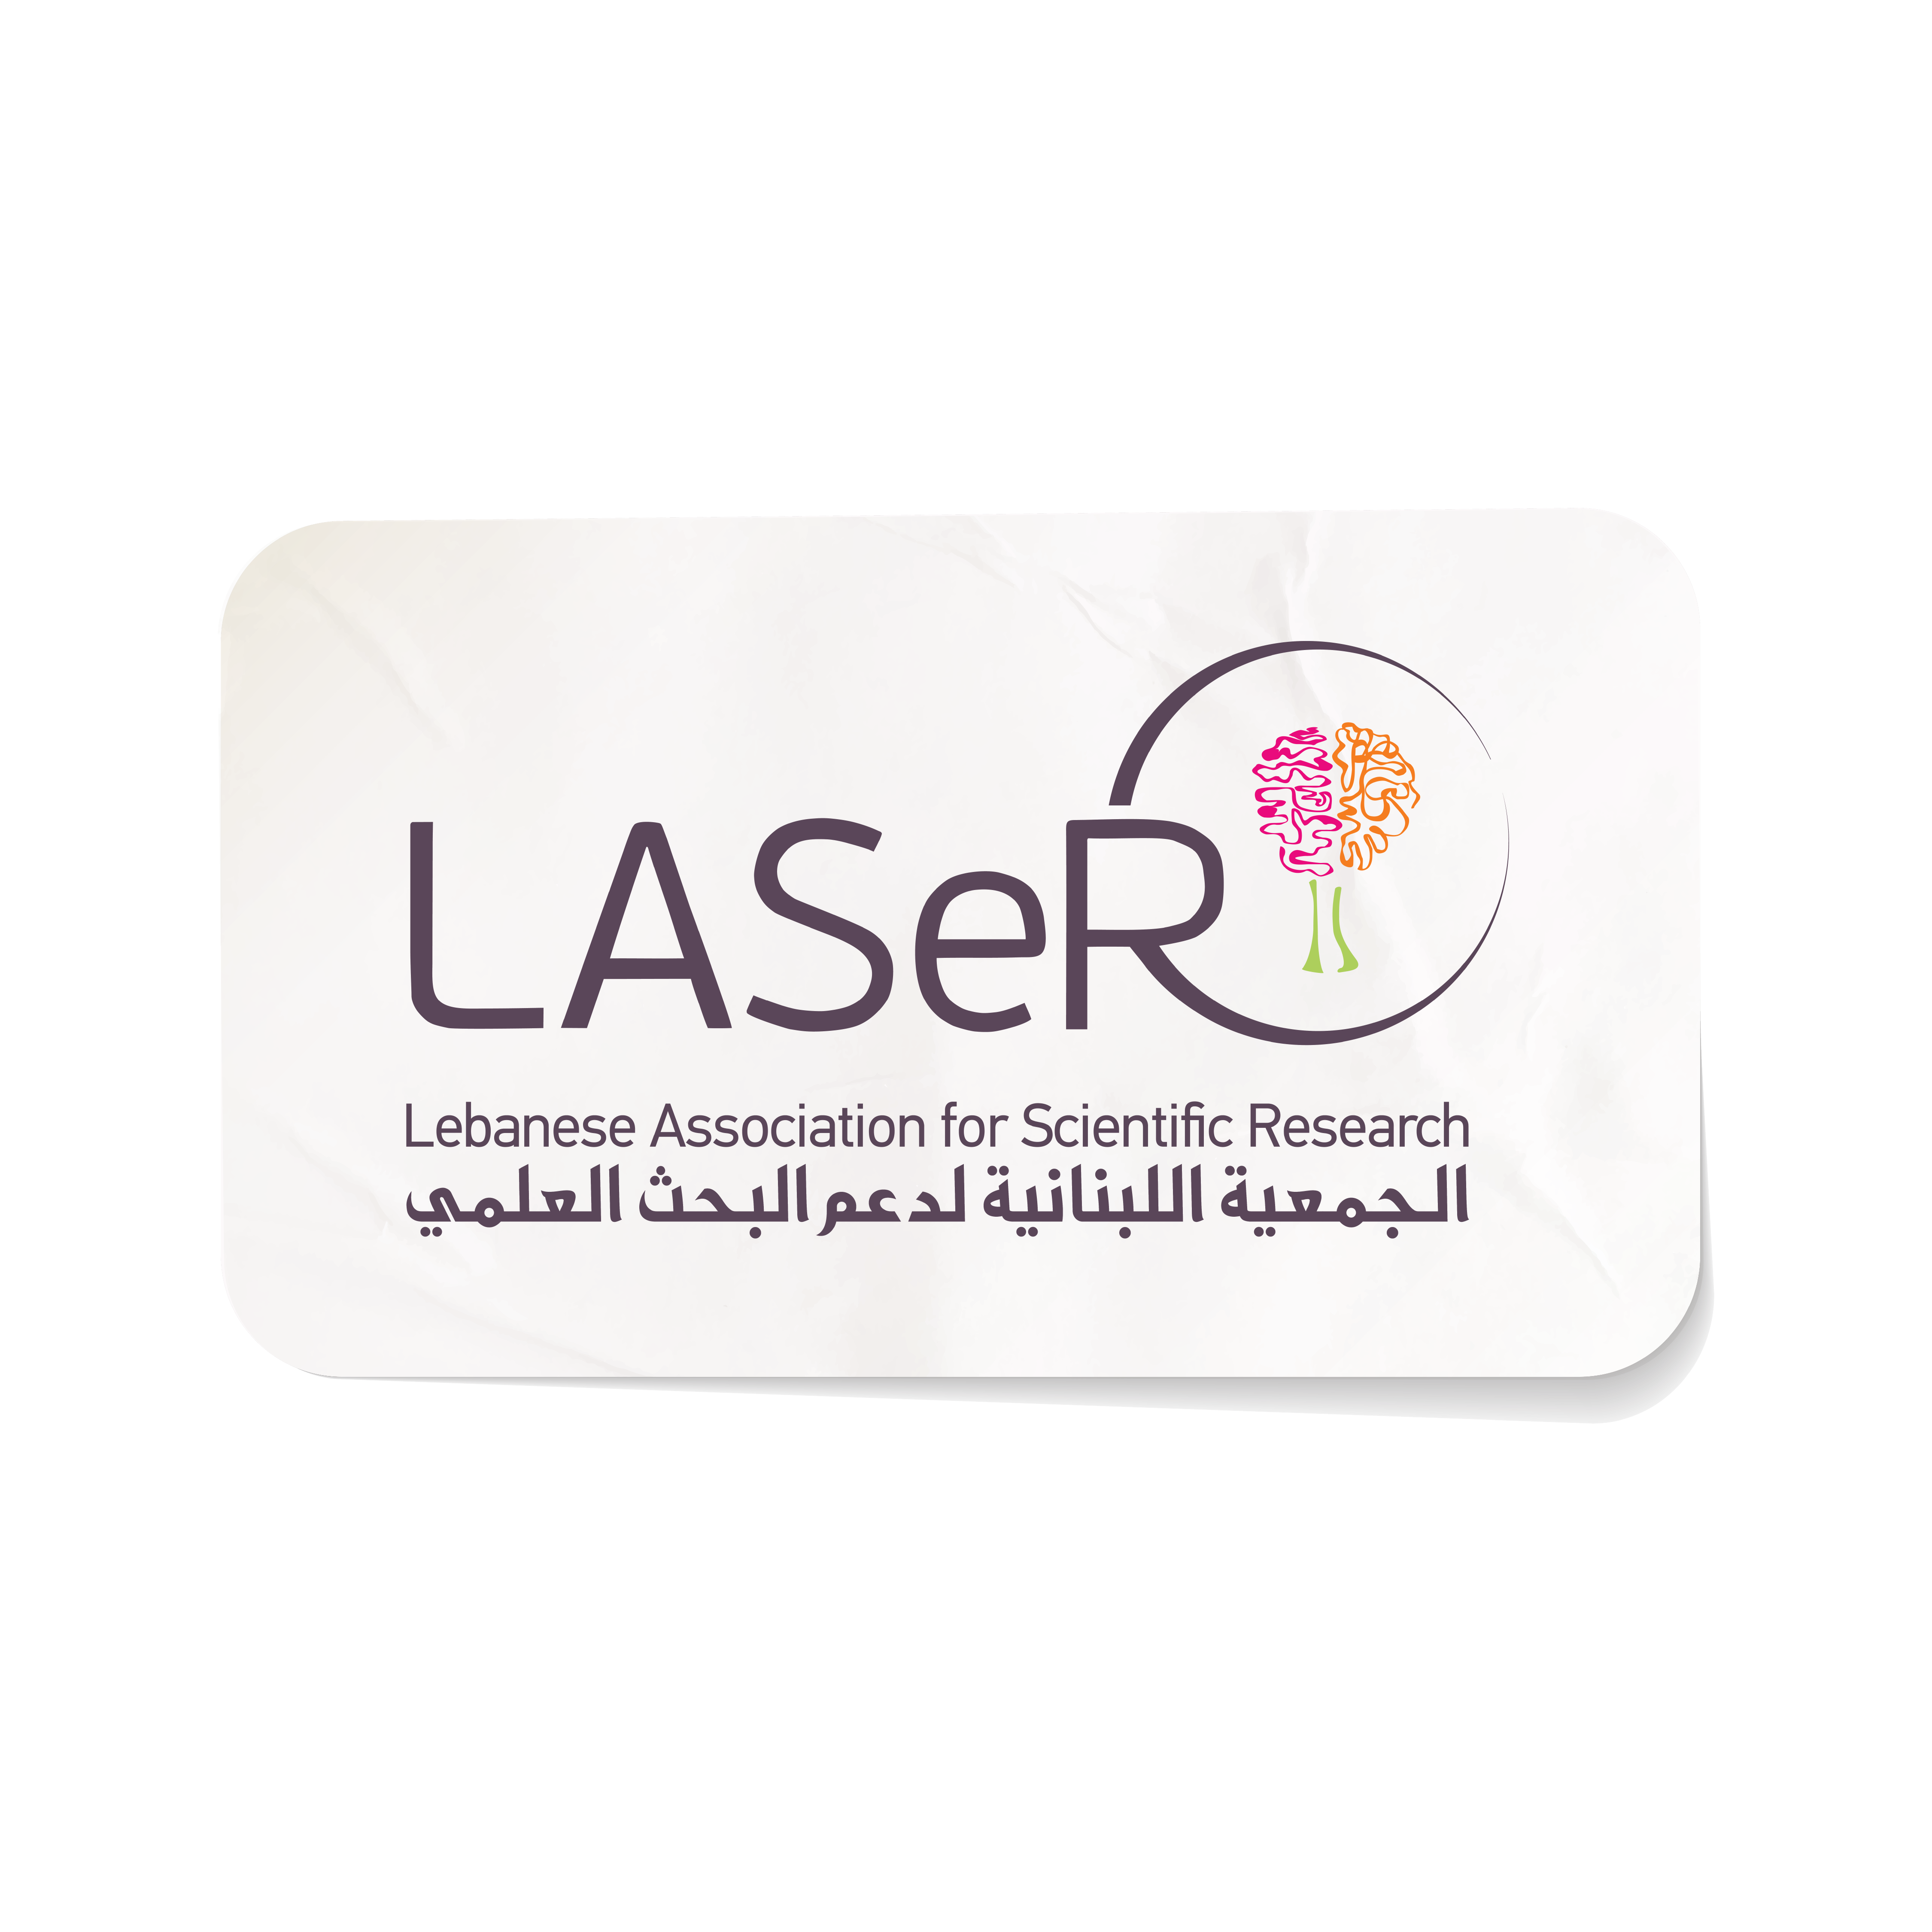 https://ensany.com/The Lebanese Association for Scientific Research (LASeR)